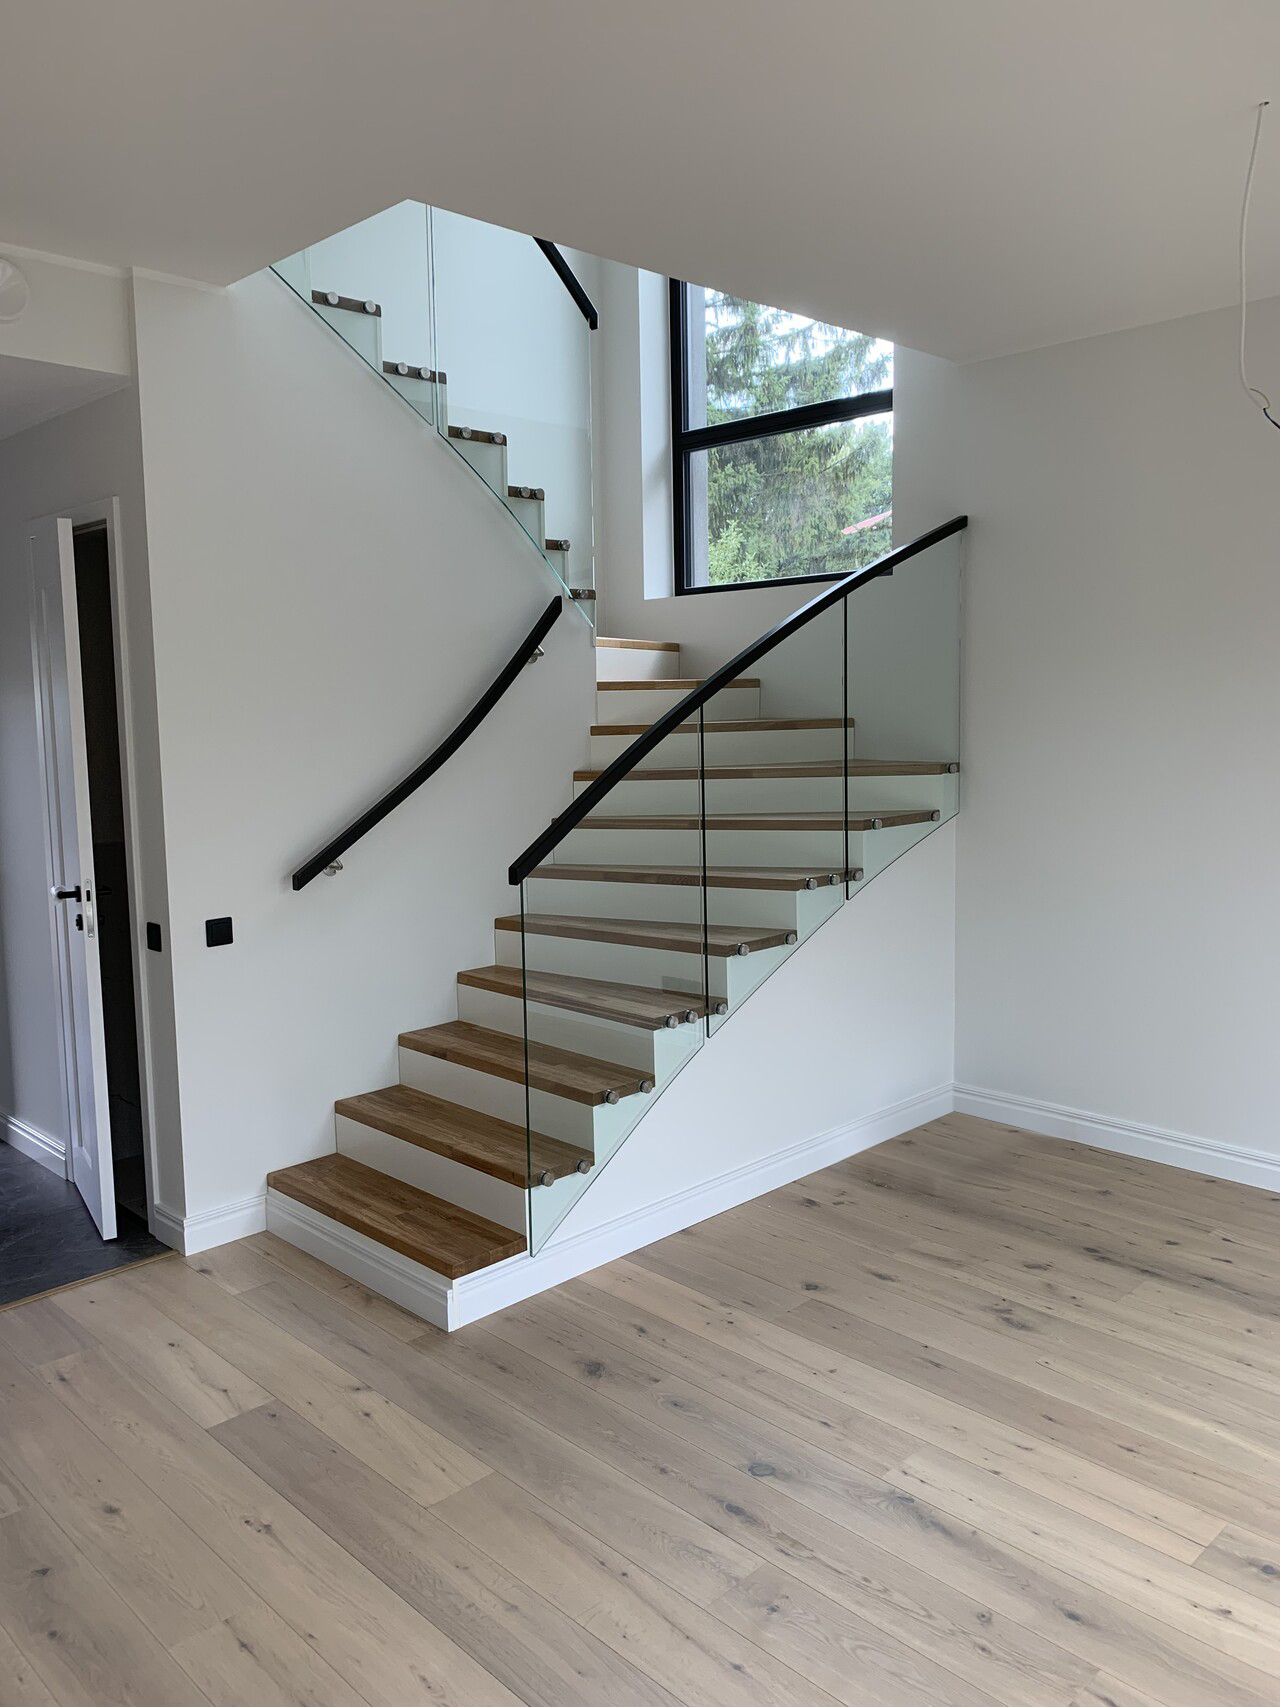 Design staircase with glass railing